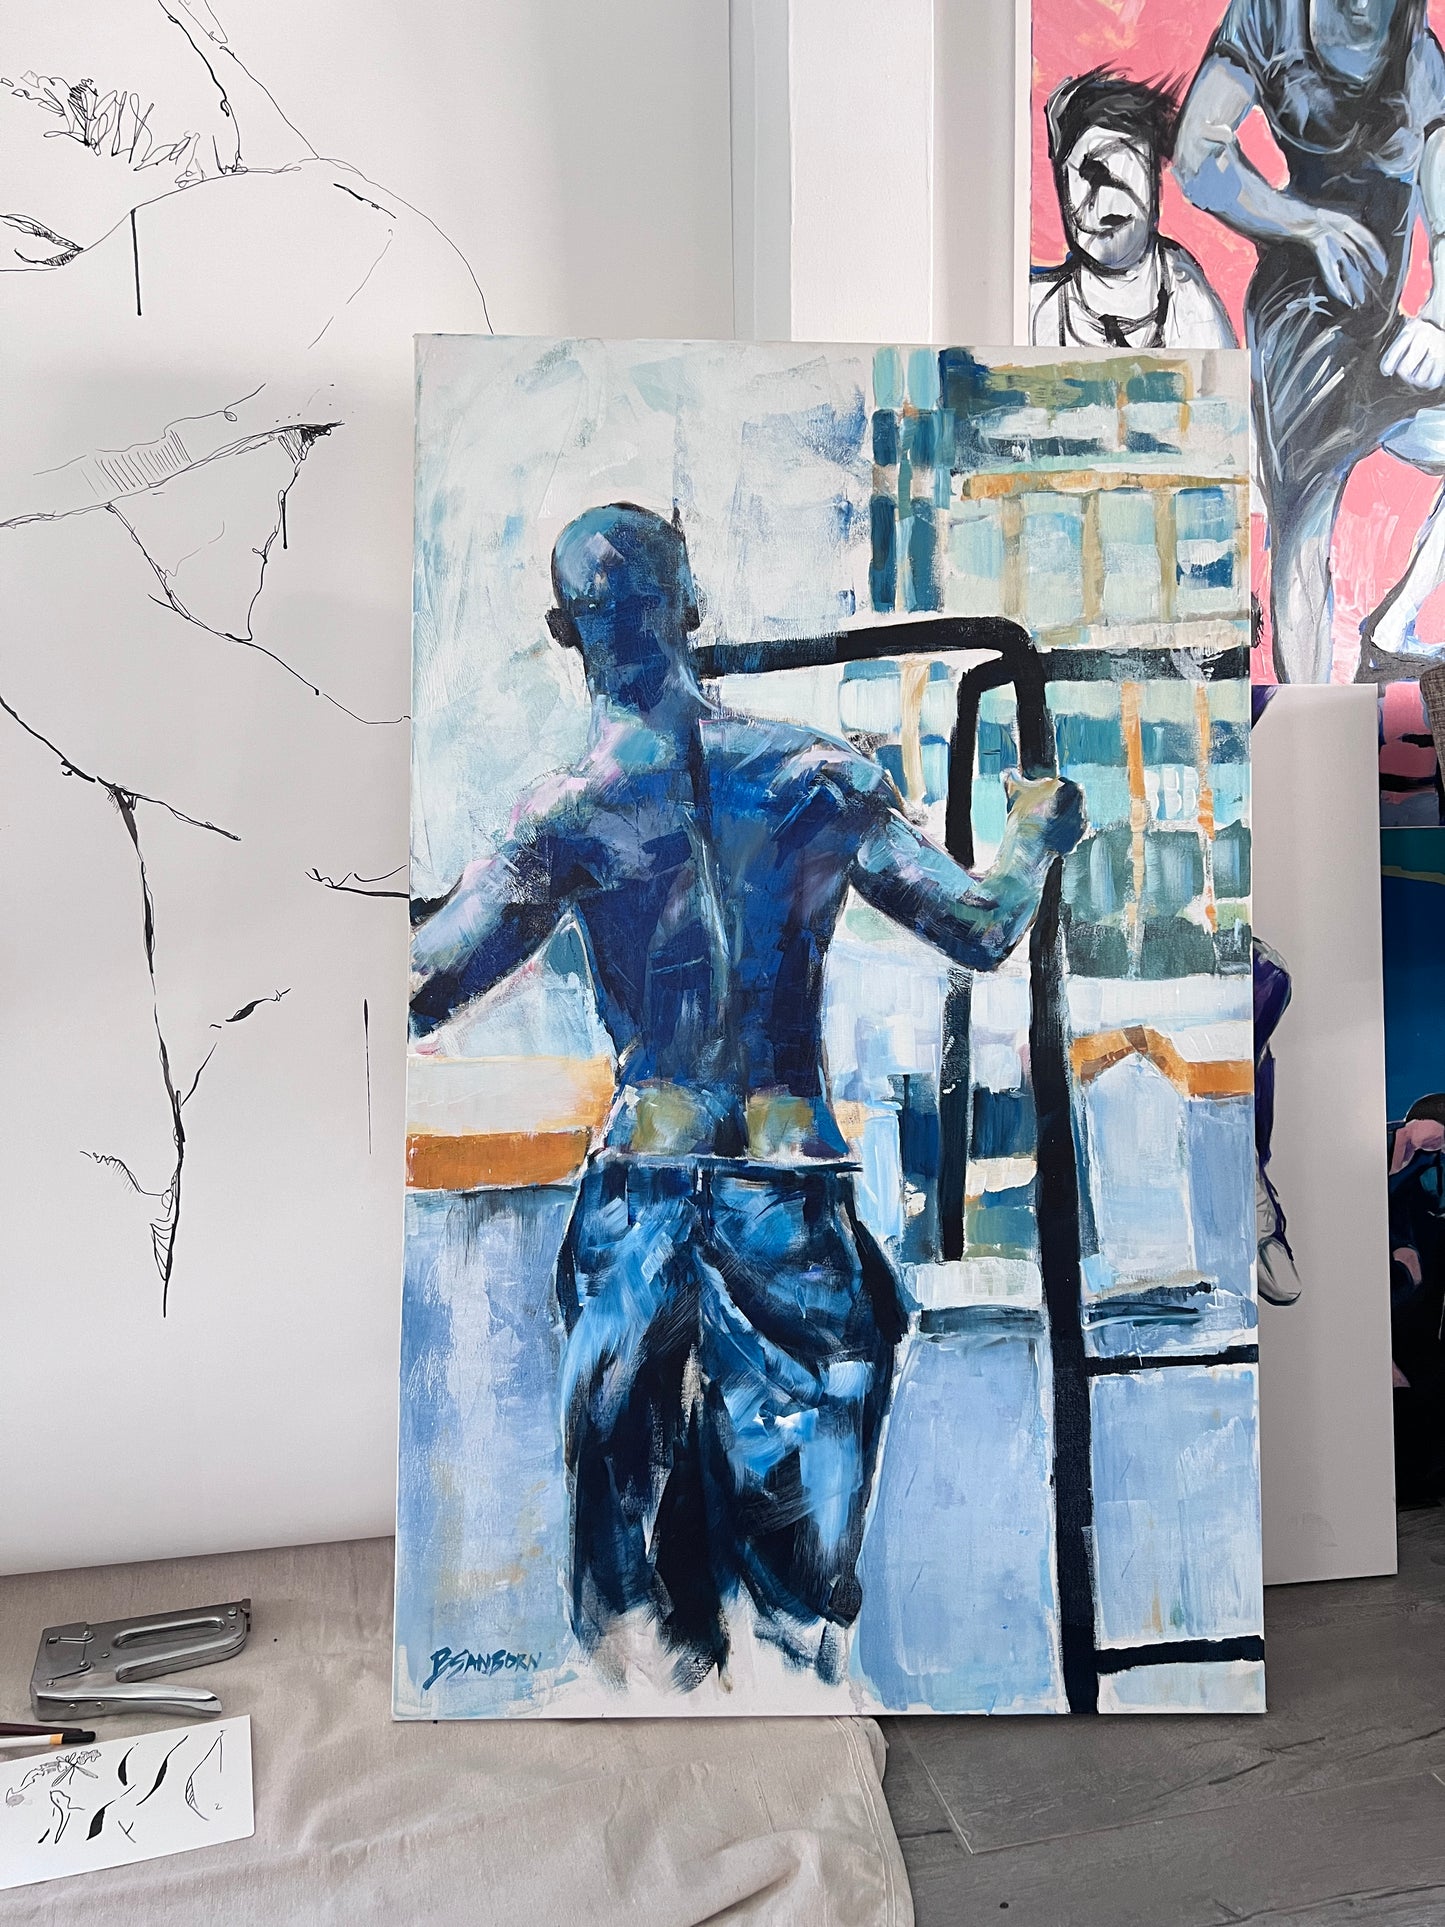 City of Lights - Semi Nude Male in New York City - Original Acrylic Painting